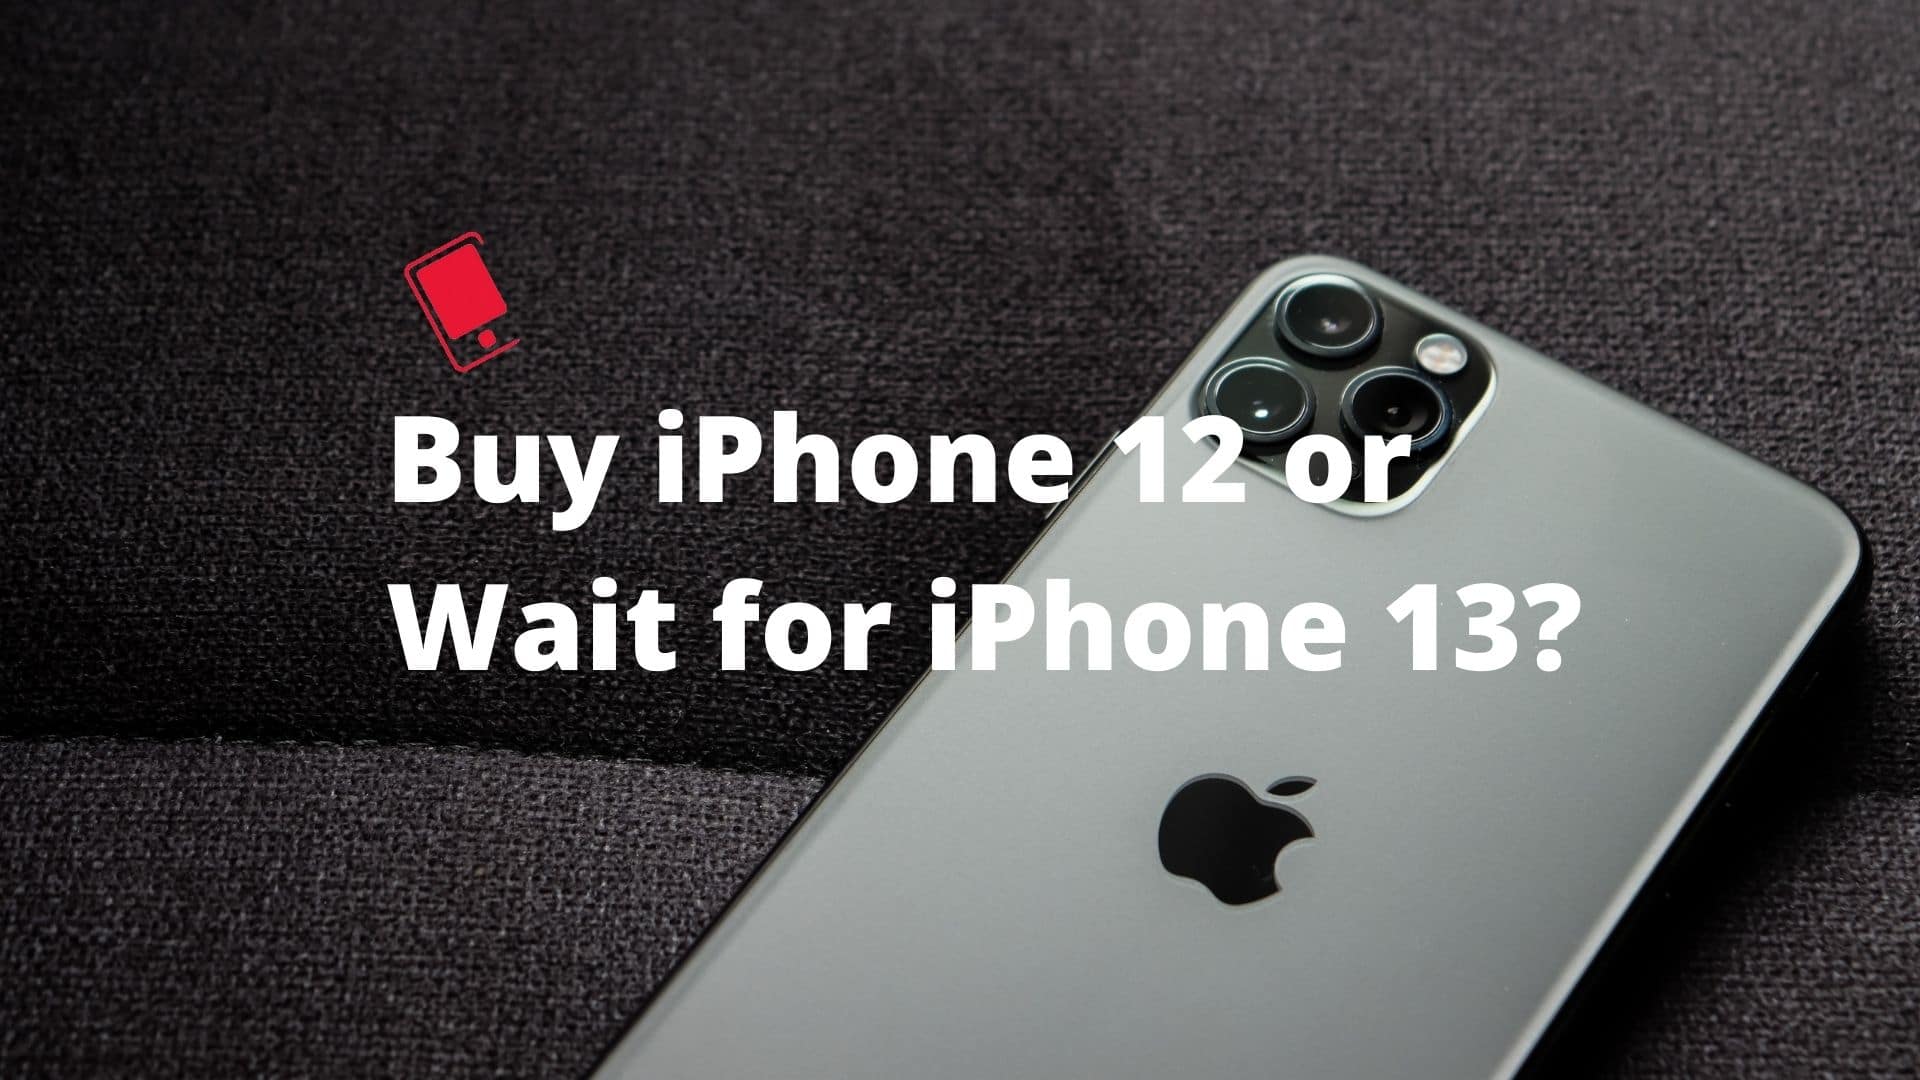 Buy iPhone 12 or wait for iPhone 13?